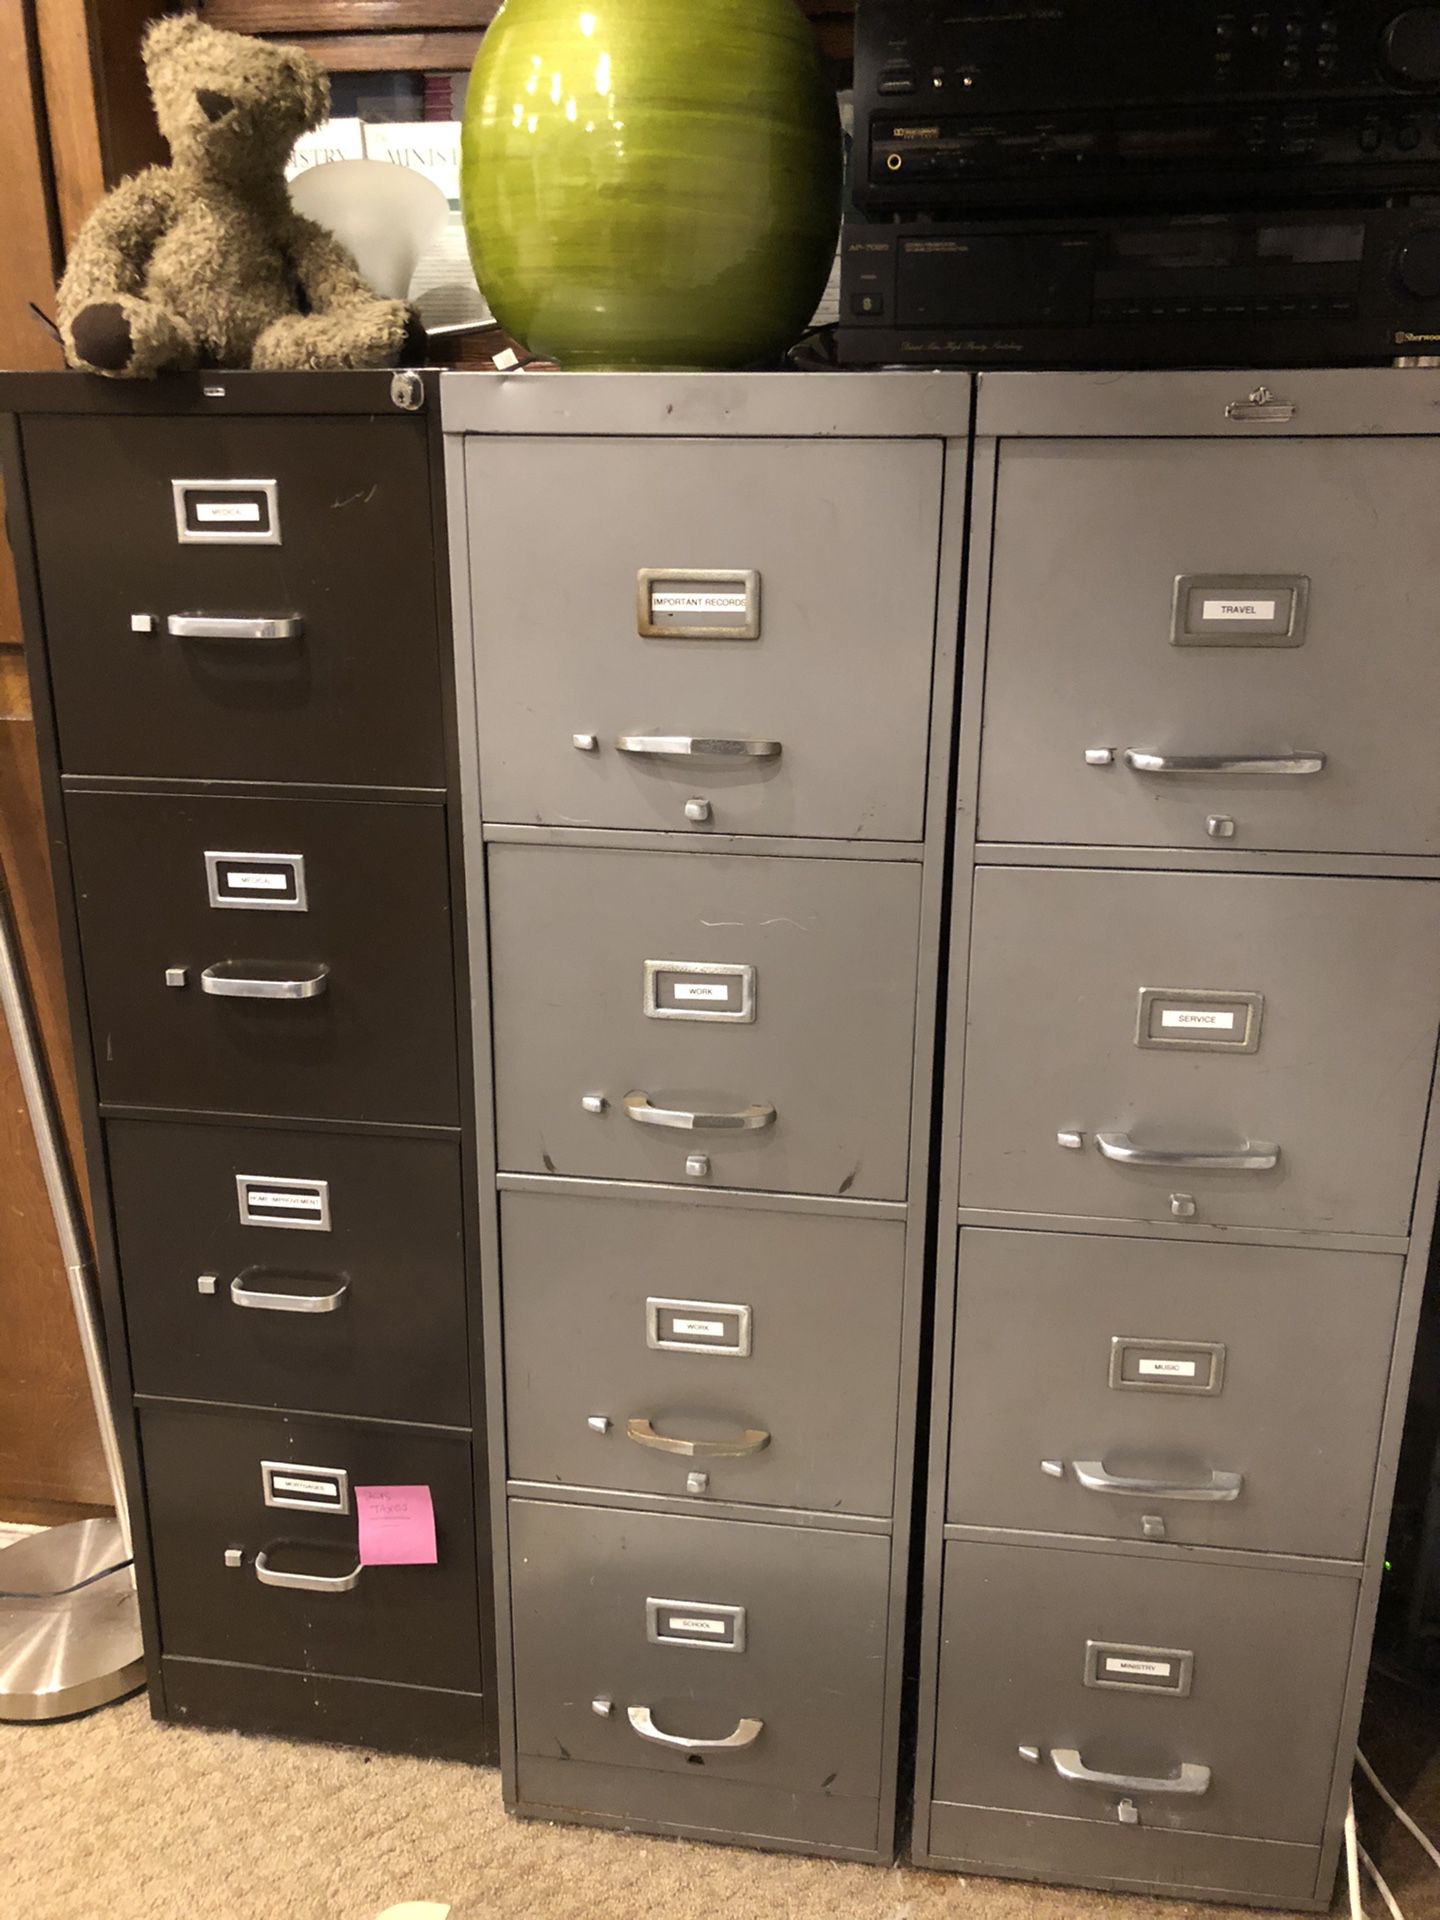 2 Letter size grey file cabinets